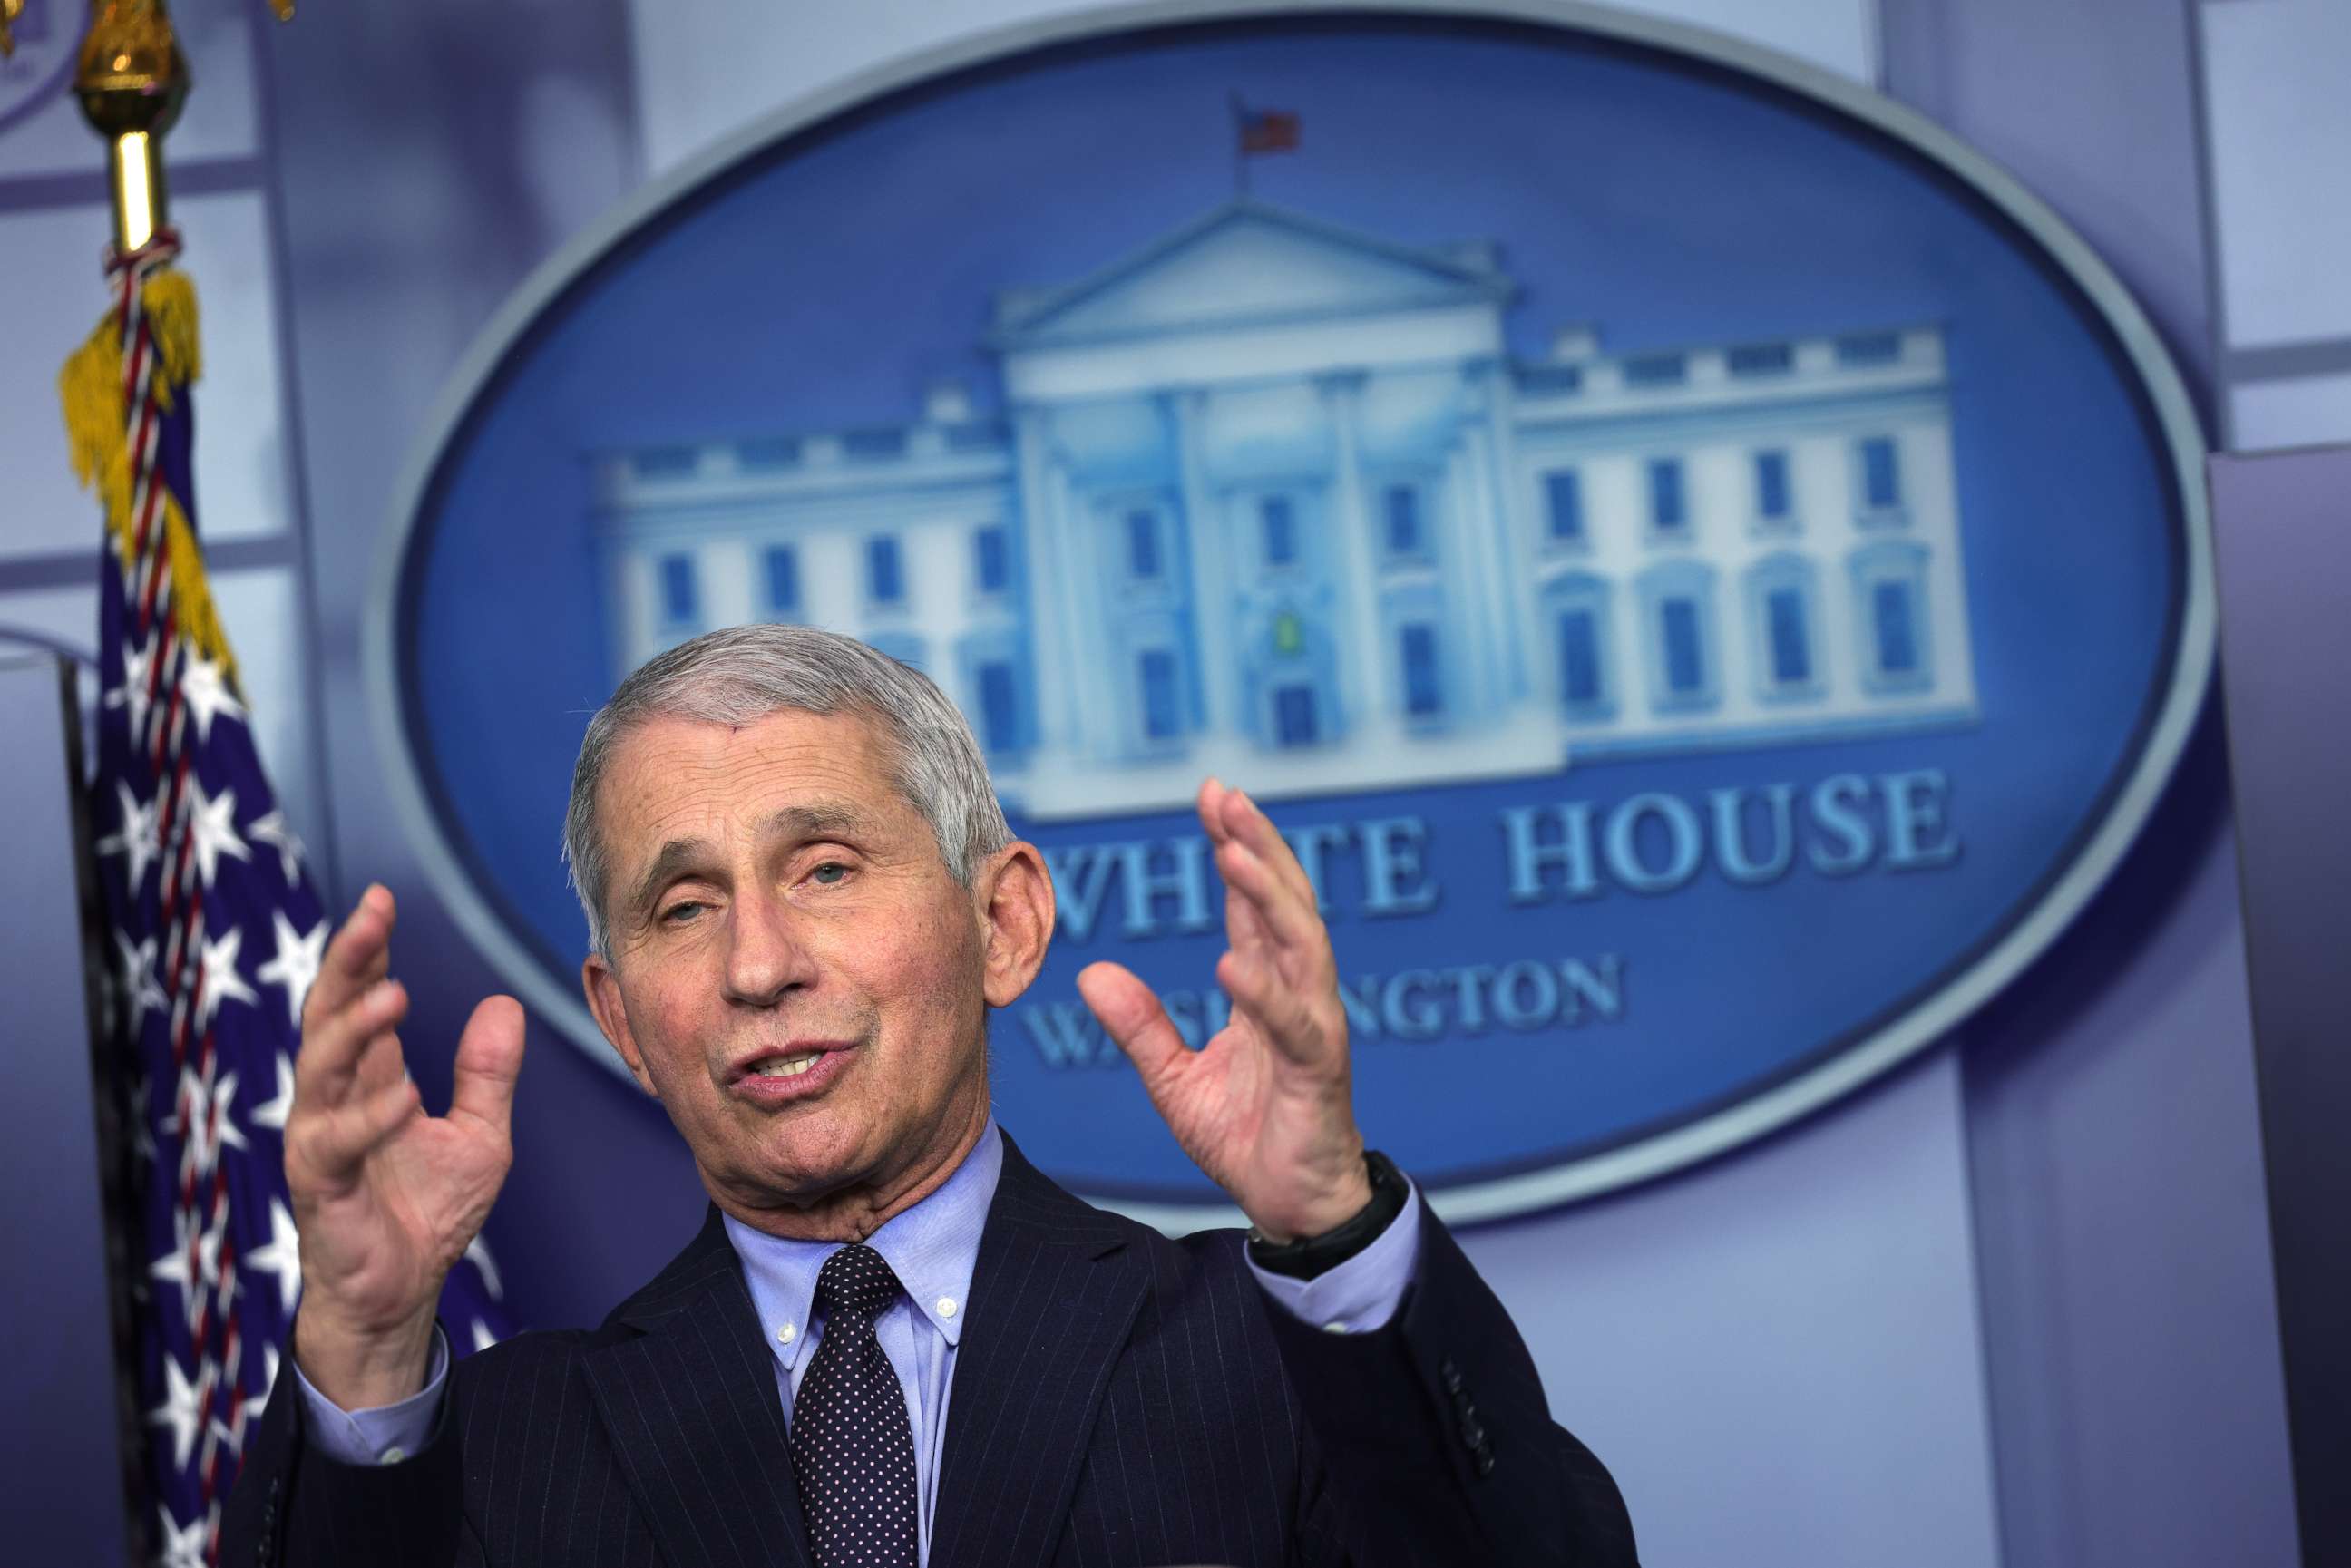 PHOTO: Dr. Anthony Fauci, director of the National Institute of Allergy and Infectious Diseases, speaks during a White House press briefing in the James Brady Press Briefing Room of the White House, Jan. 21, 2021, in Washington.